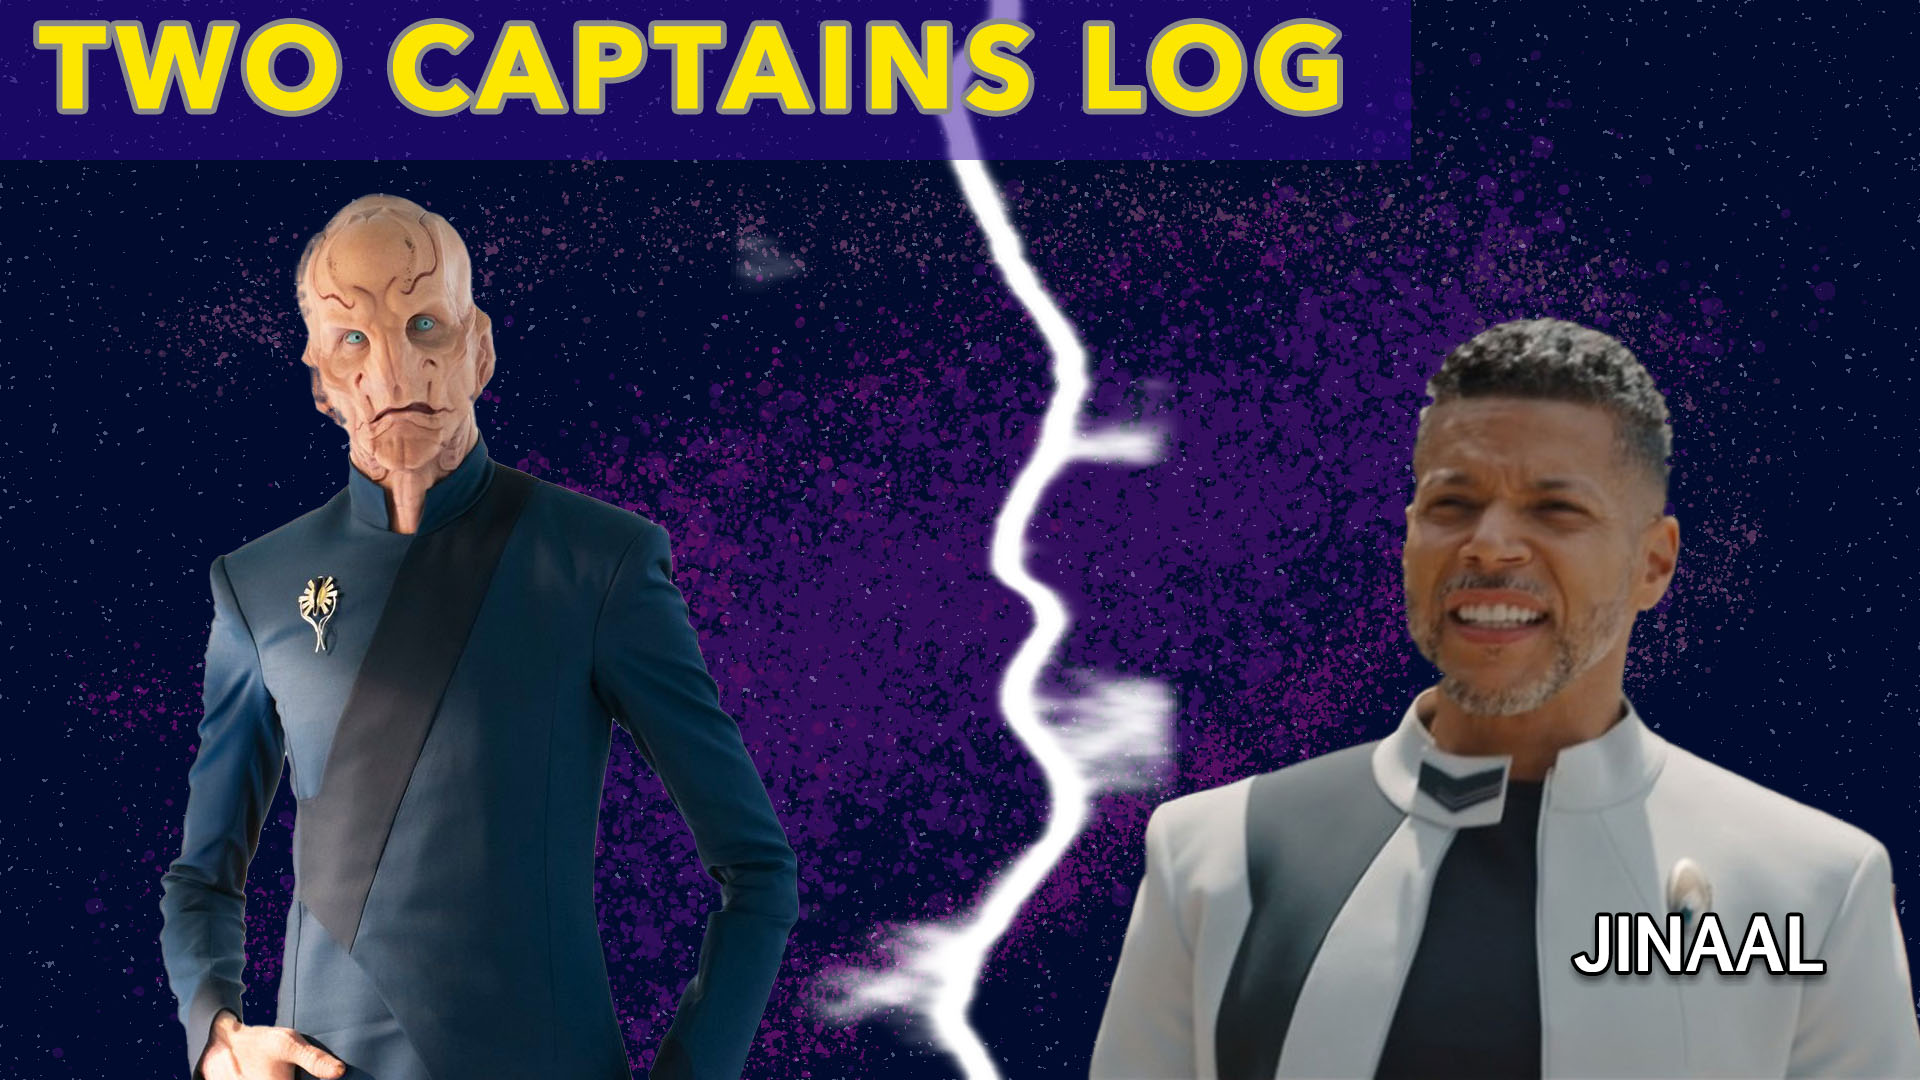 Two Captains Log: Star Trek: Discovery S5E3 – “Jinaal” Review